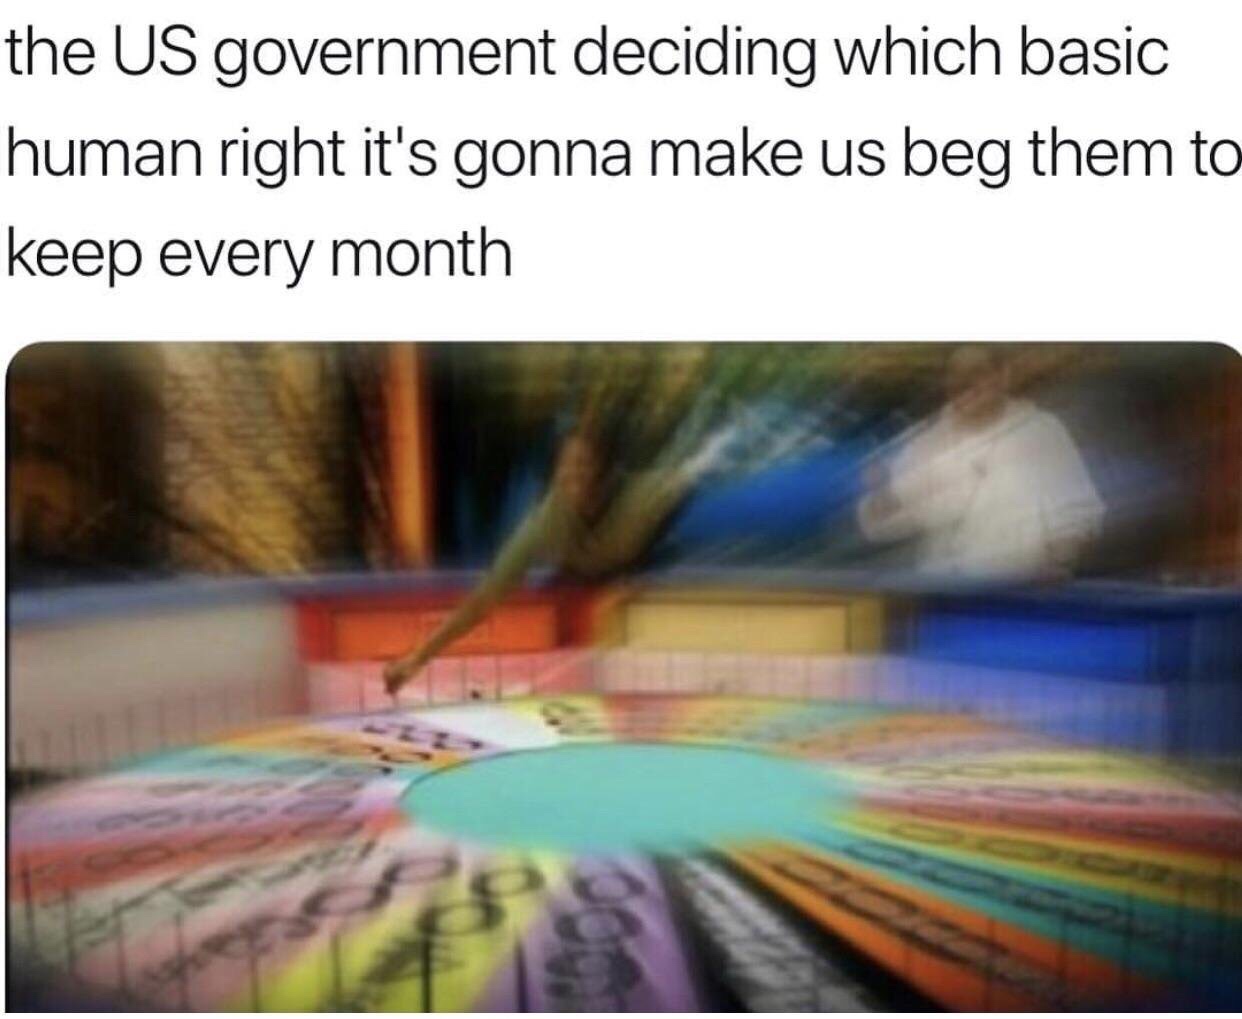 government deciding which basic human right - the Us government deciding which basic human right it's gonna make us beg them to keep every month